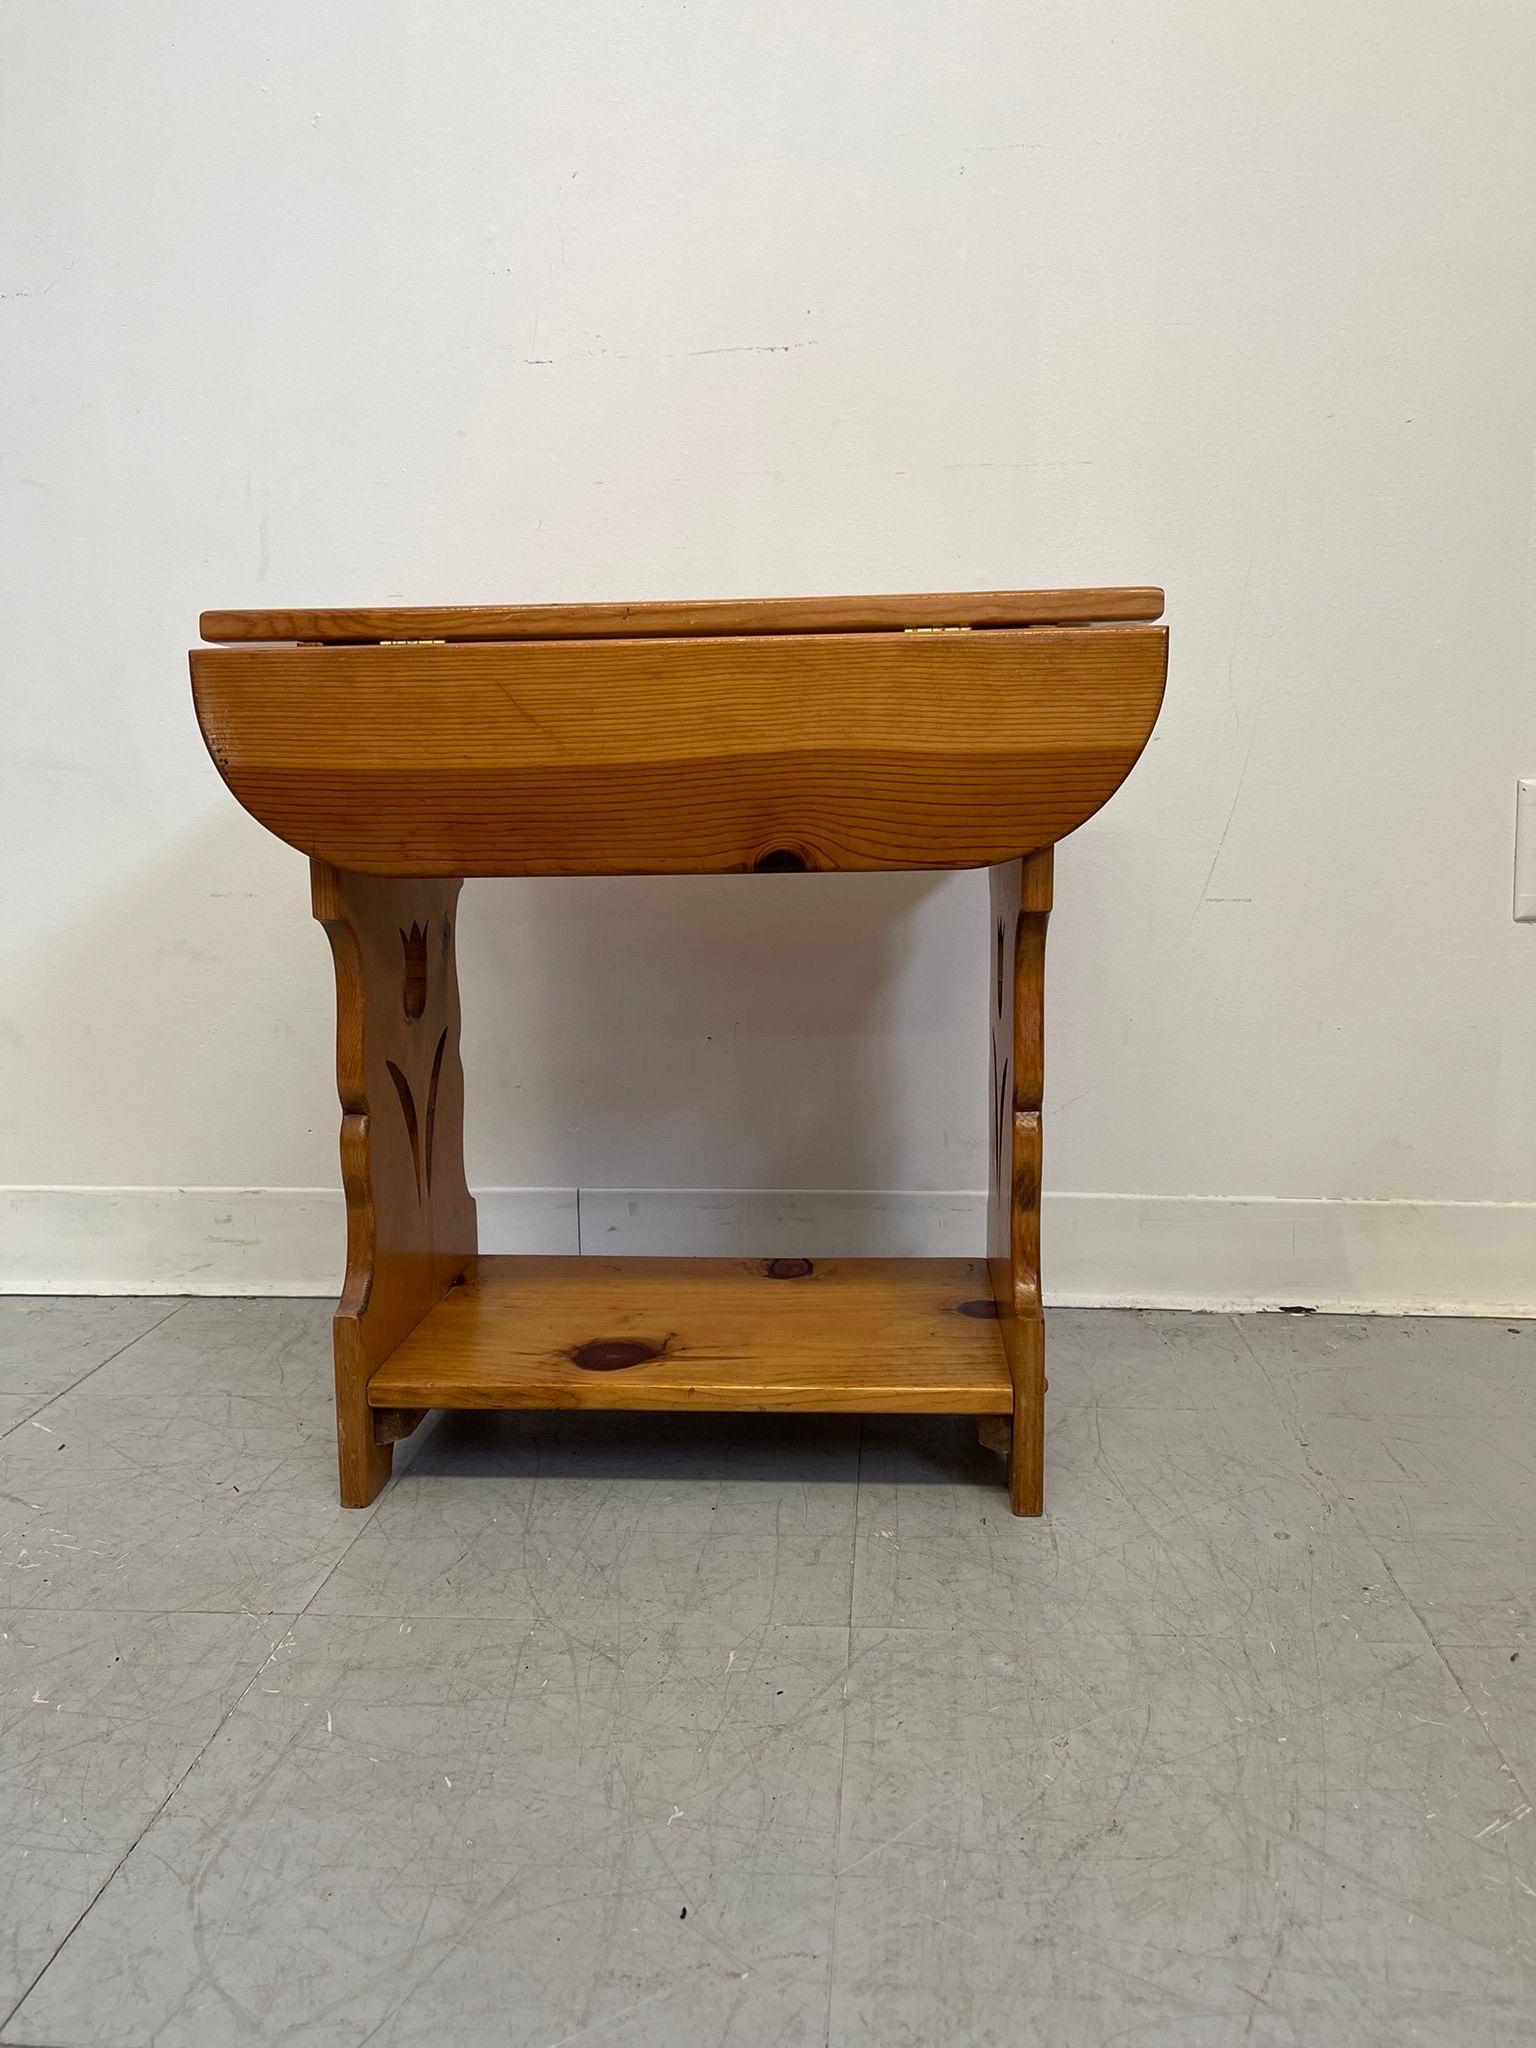 Wood Vintage Decorative Drop Leaf End Table With Carved Tulip Cutout. For Sale